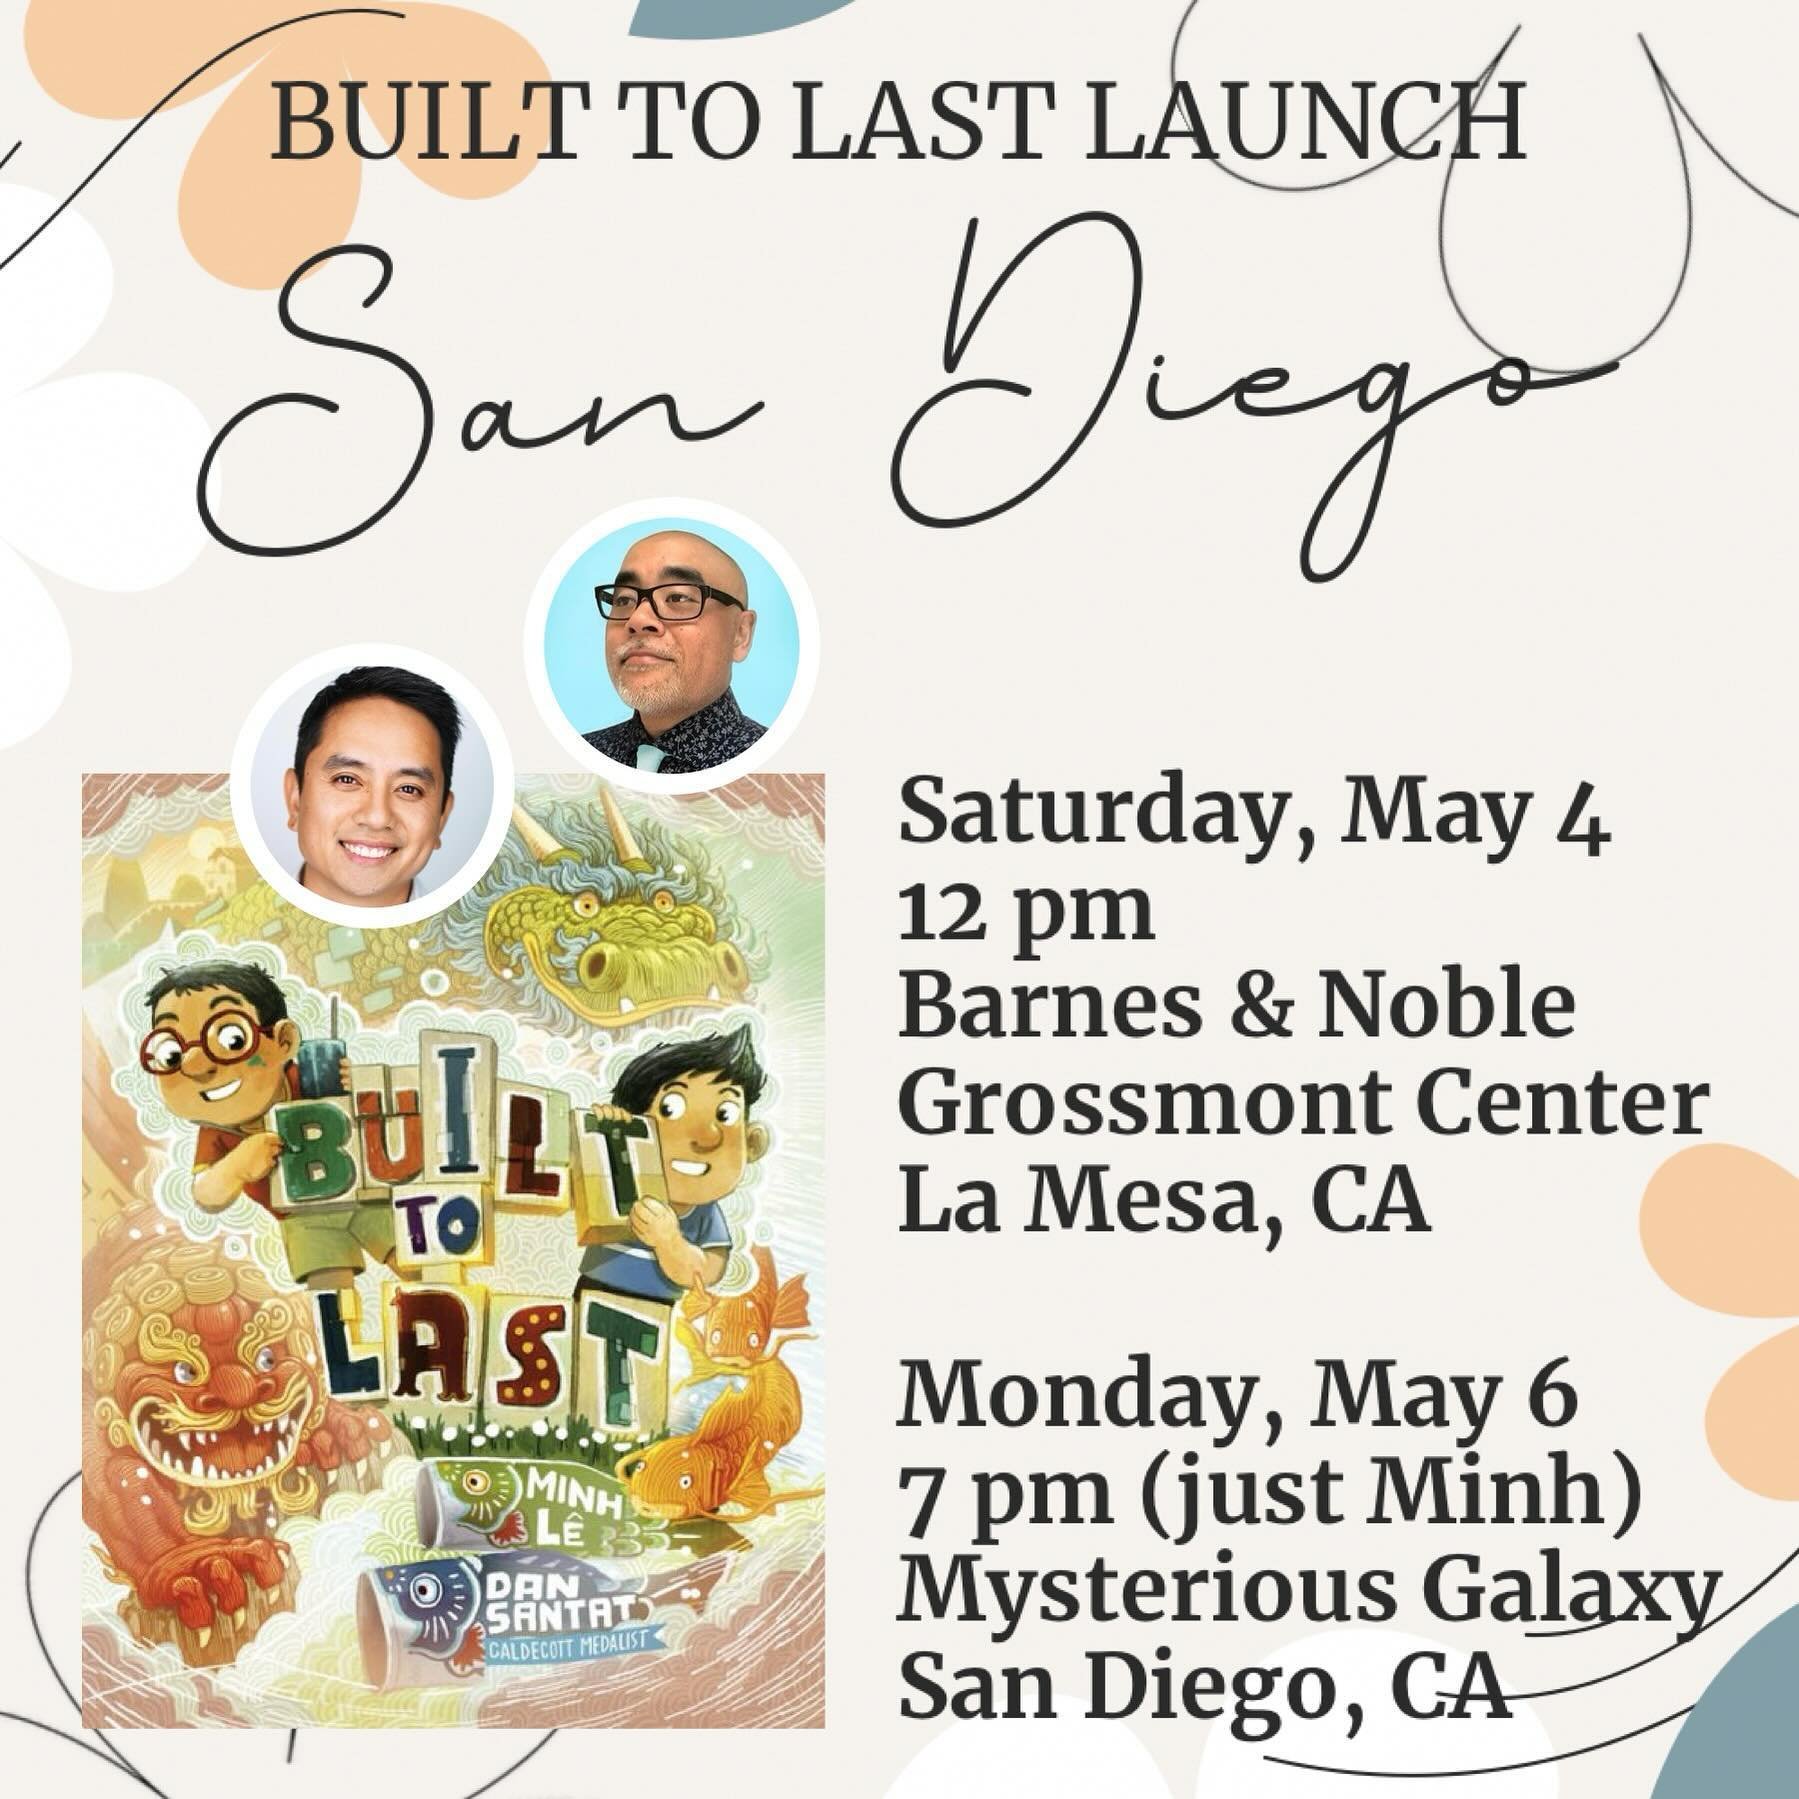 BUILT TO LAST comes out tomorrow and on Saturday, @dsantat &amp; I will be launching it in  San Diego&mdash;come join us! @knopfkids @randomhousekids 

Saturday, May 4 (12 pm)
Barnes &amp; Noble Grossmont Center
La Mesa, CA
(Note: a portion of the pr